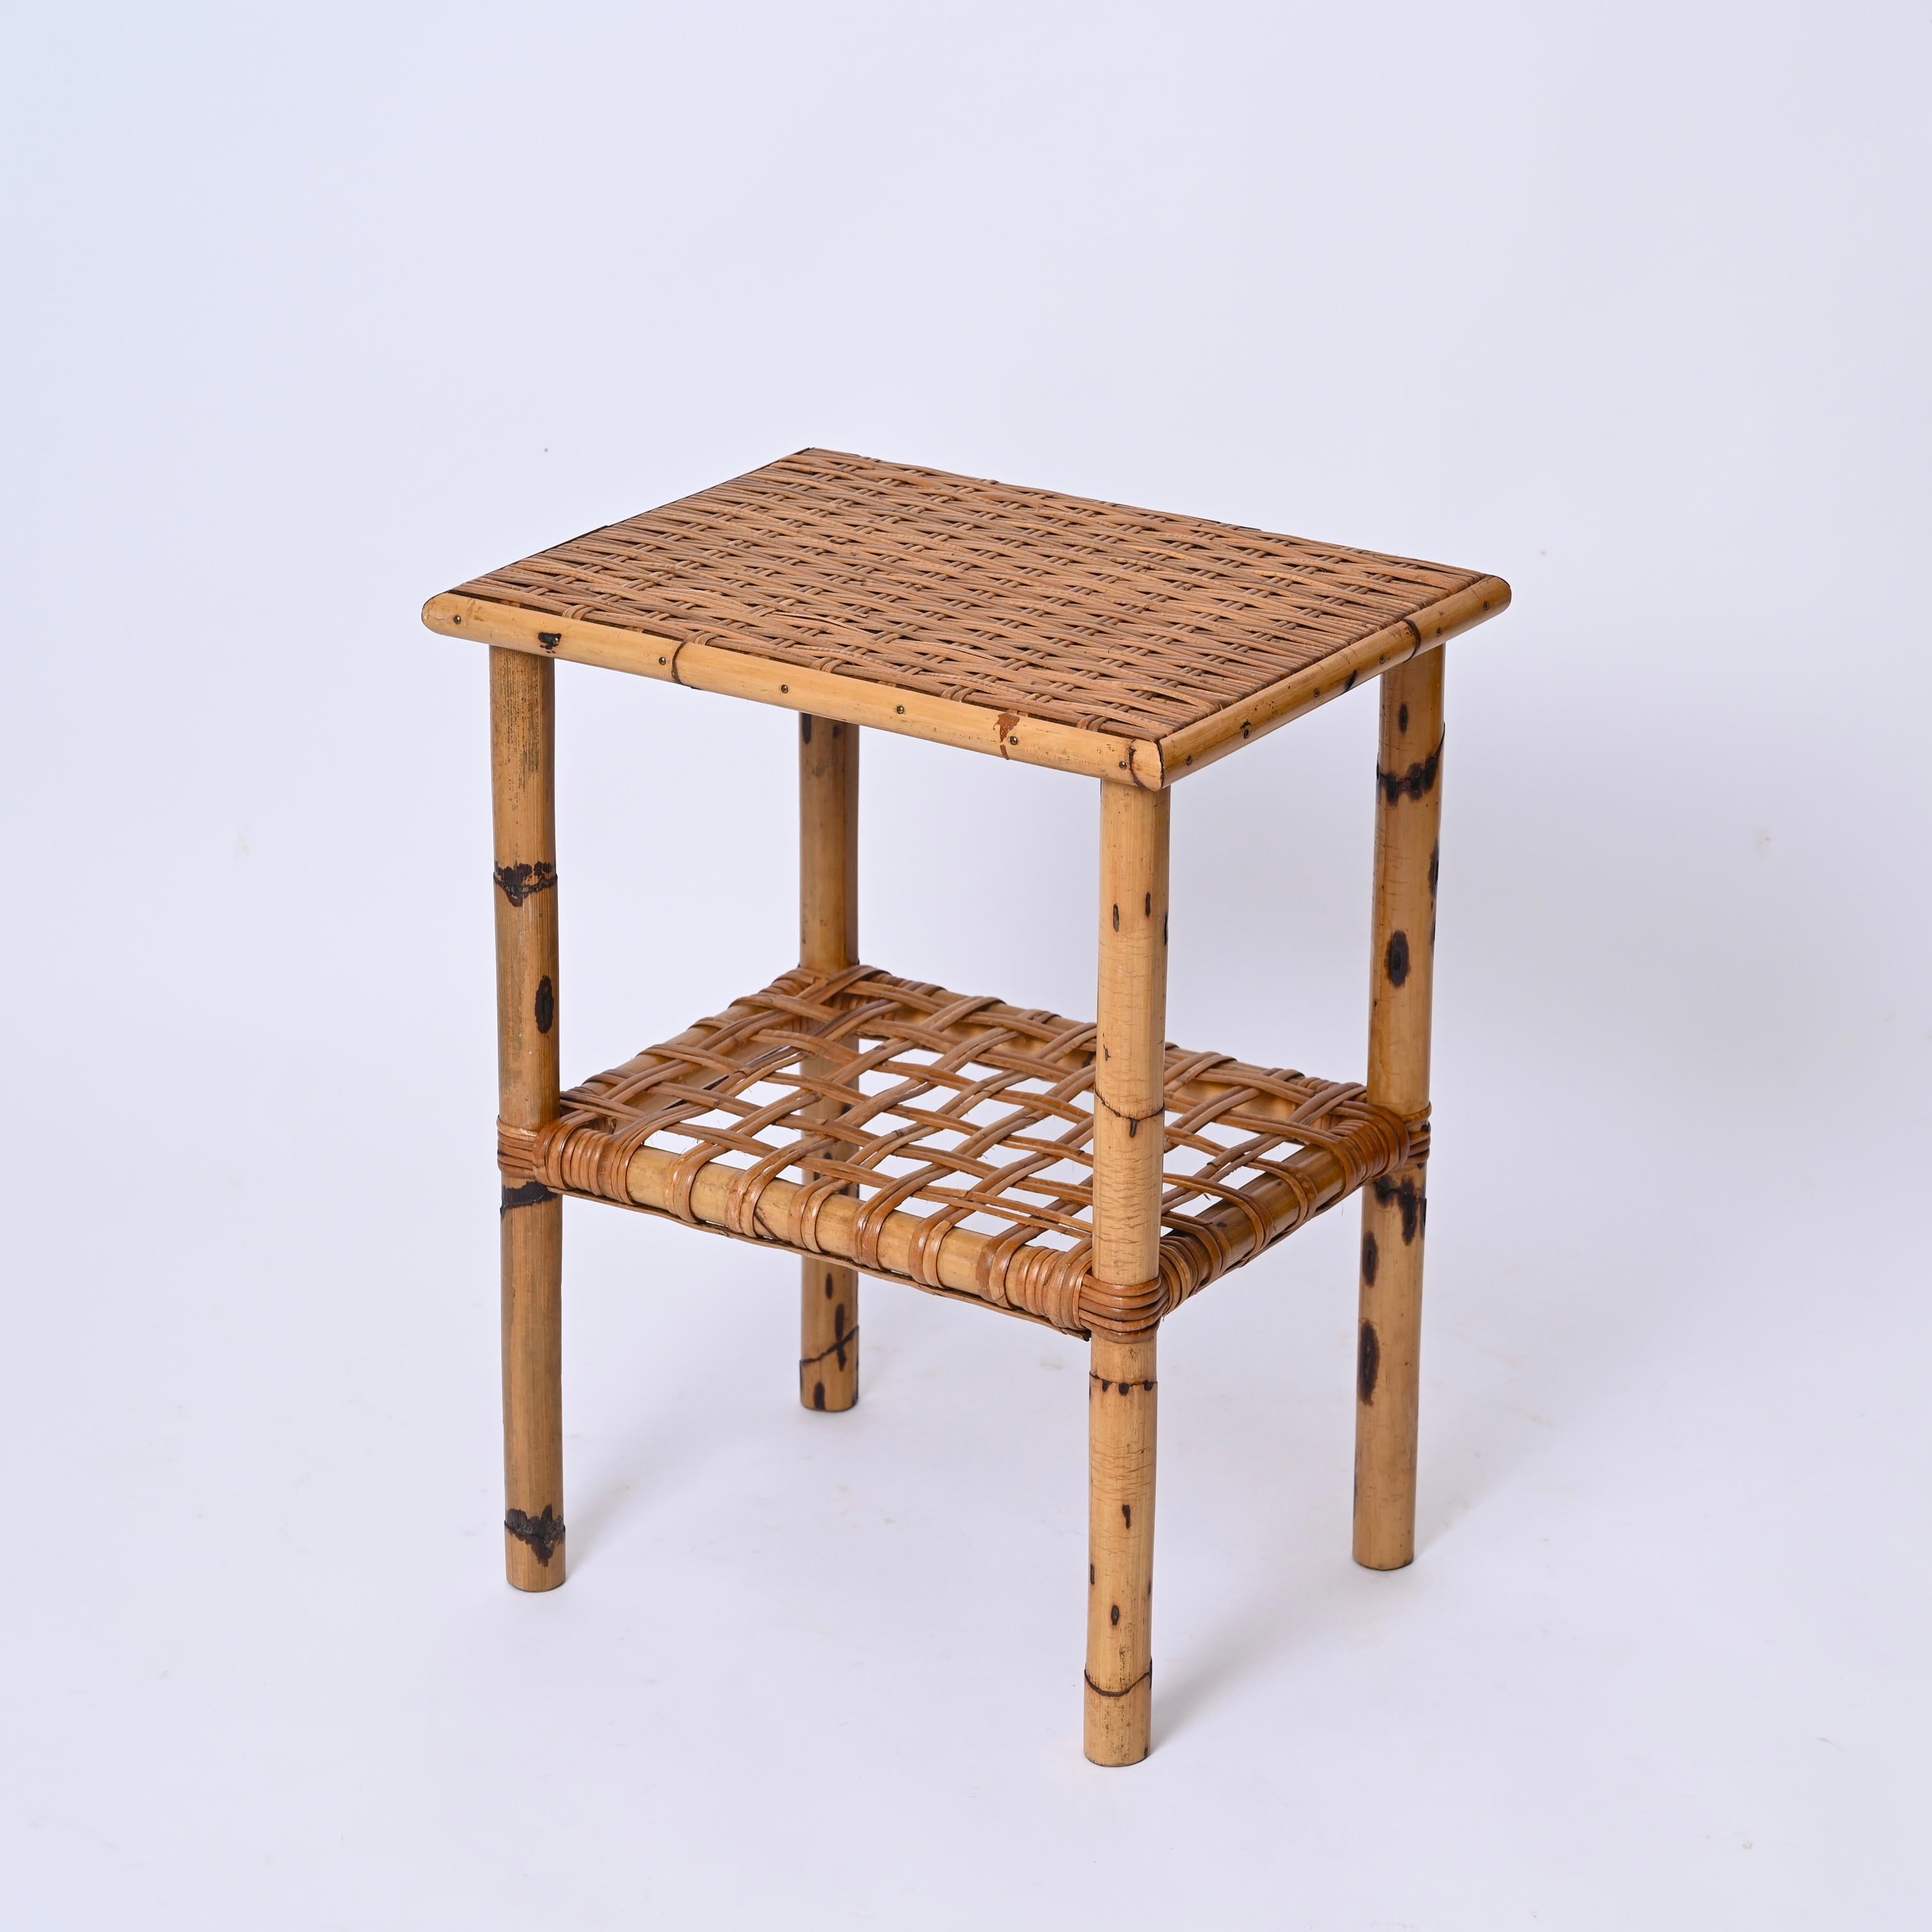 Midcentury Bamboo and Rattan Italian Coffee Table with Magazine Rack, 1960s For Sale 6